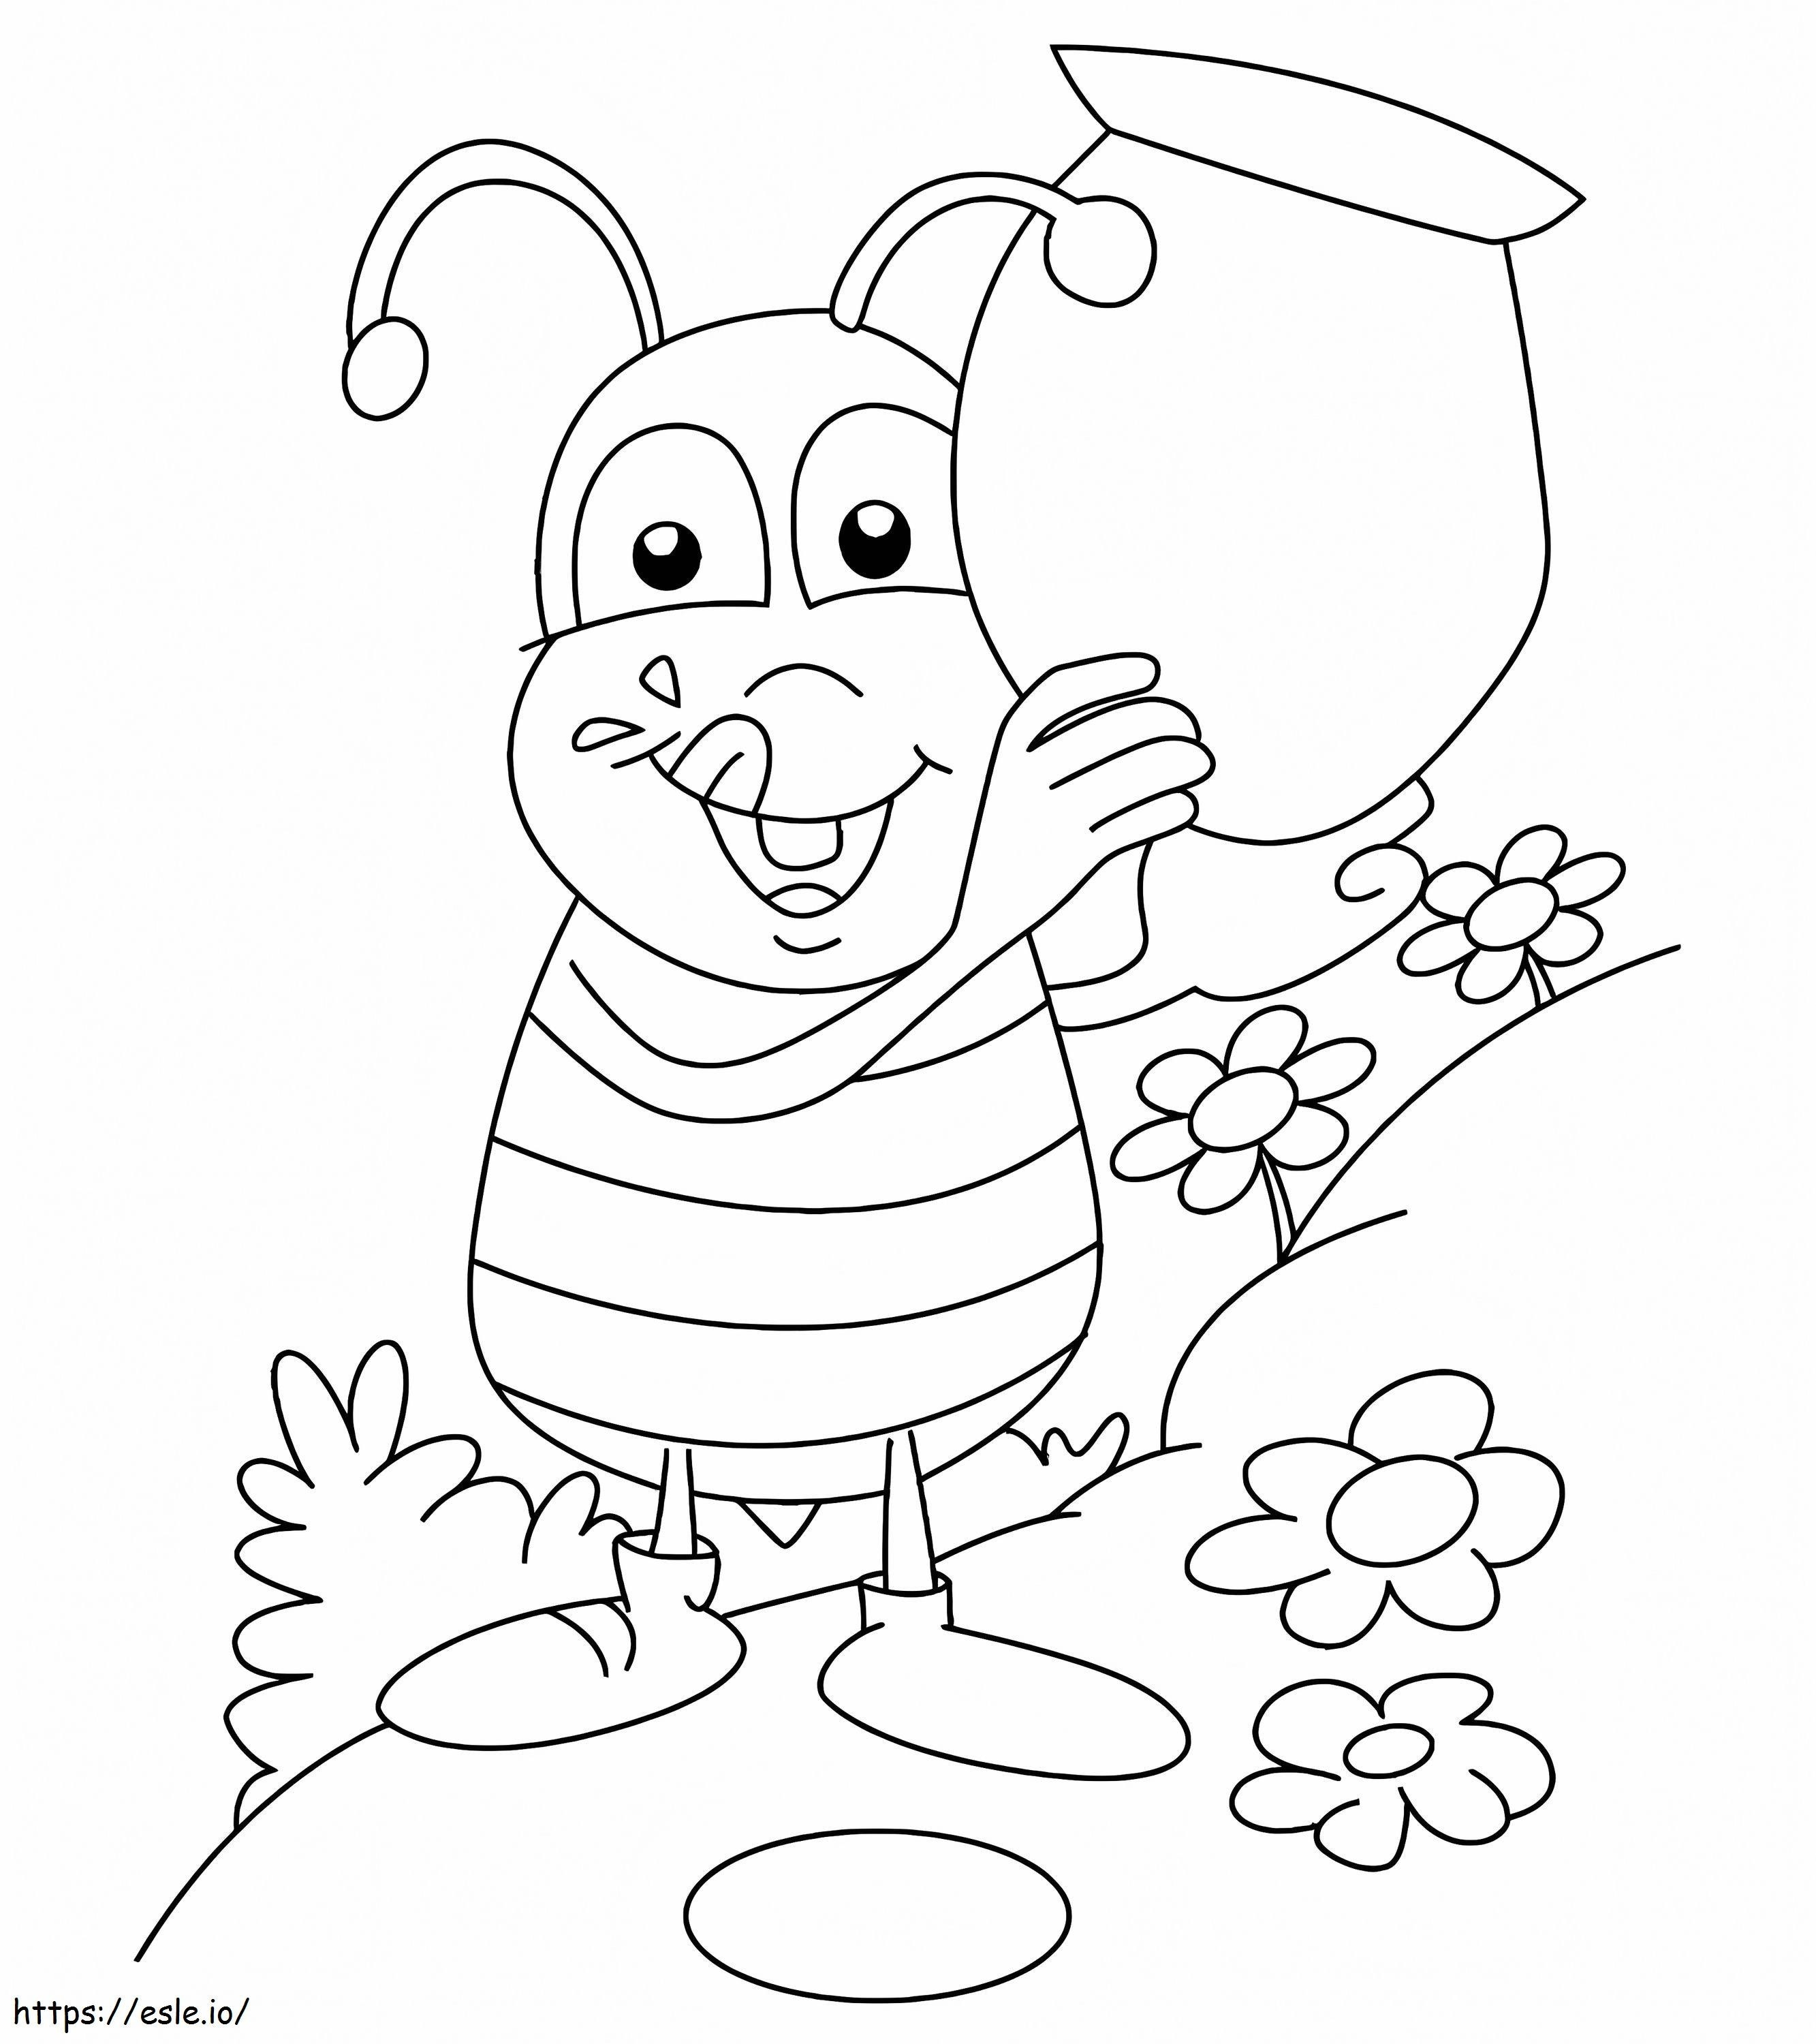 Eating Insects coloring page